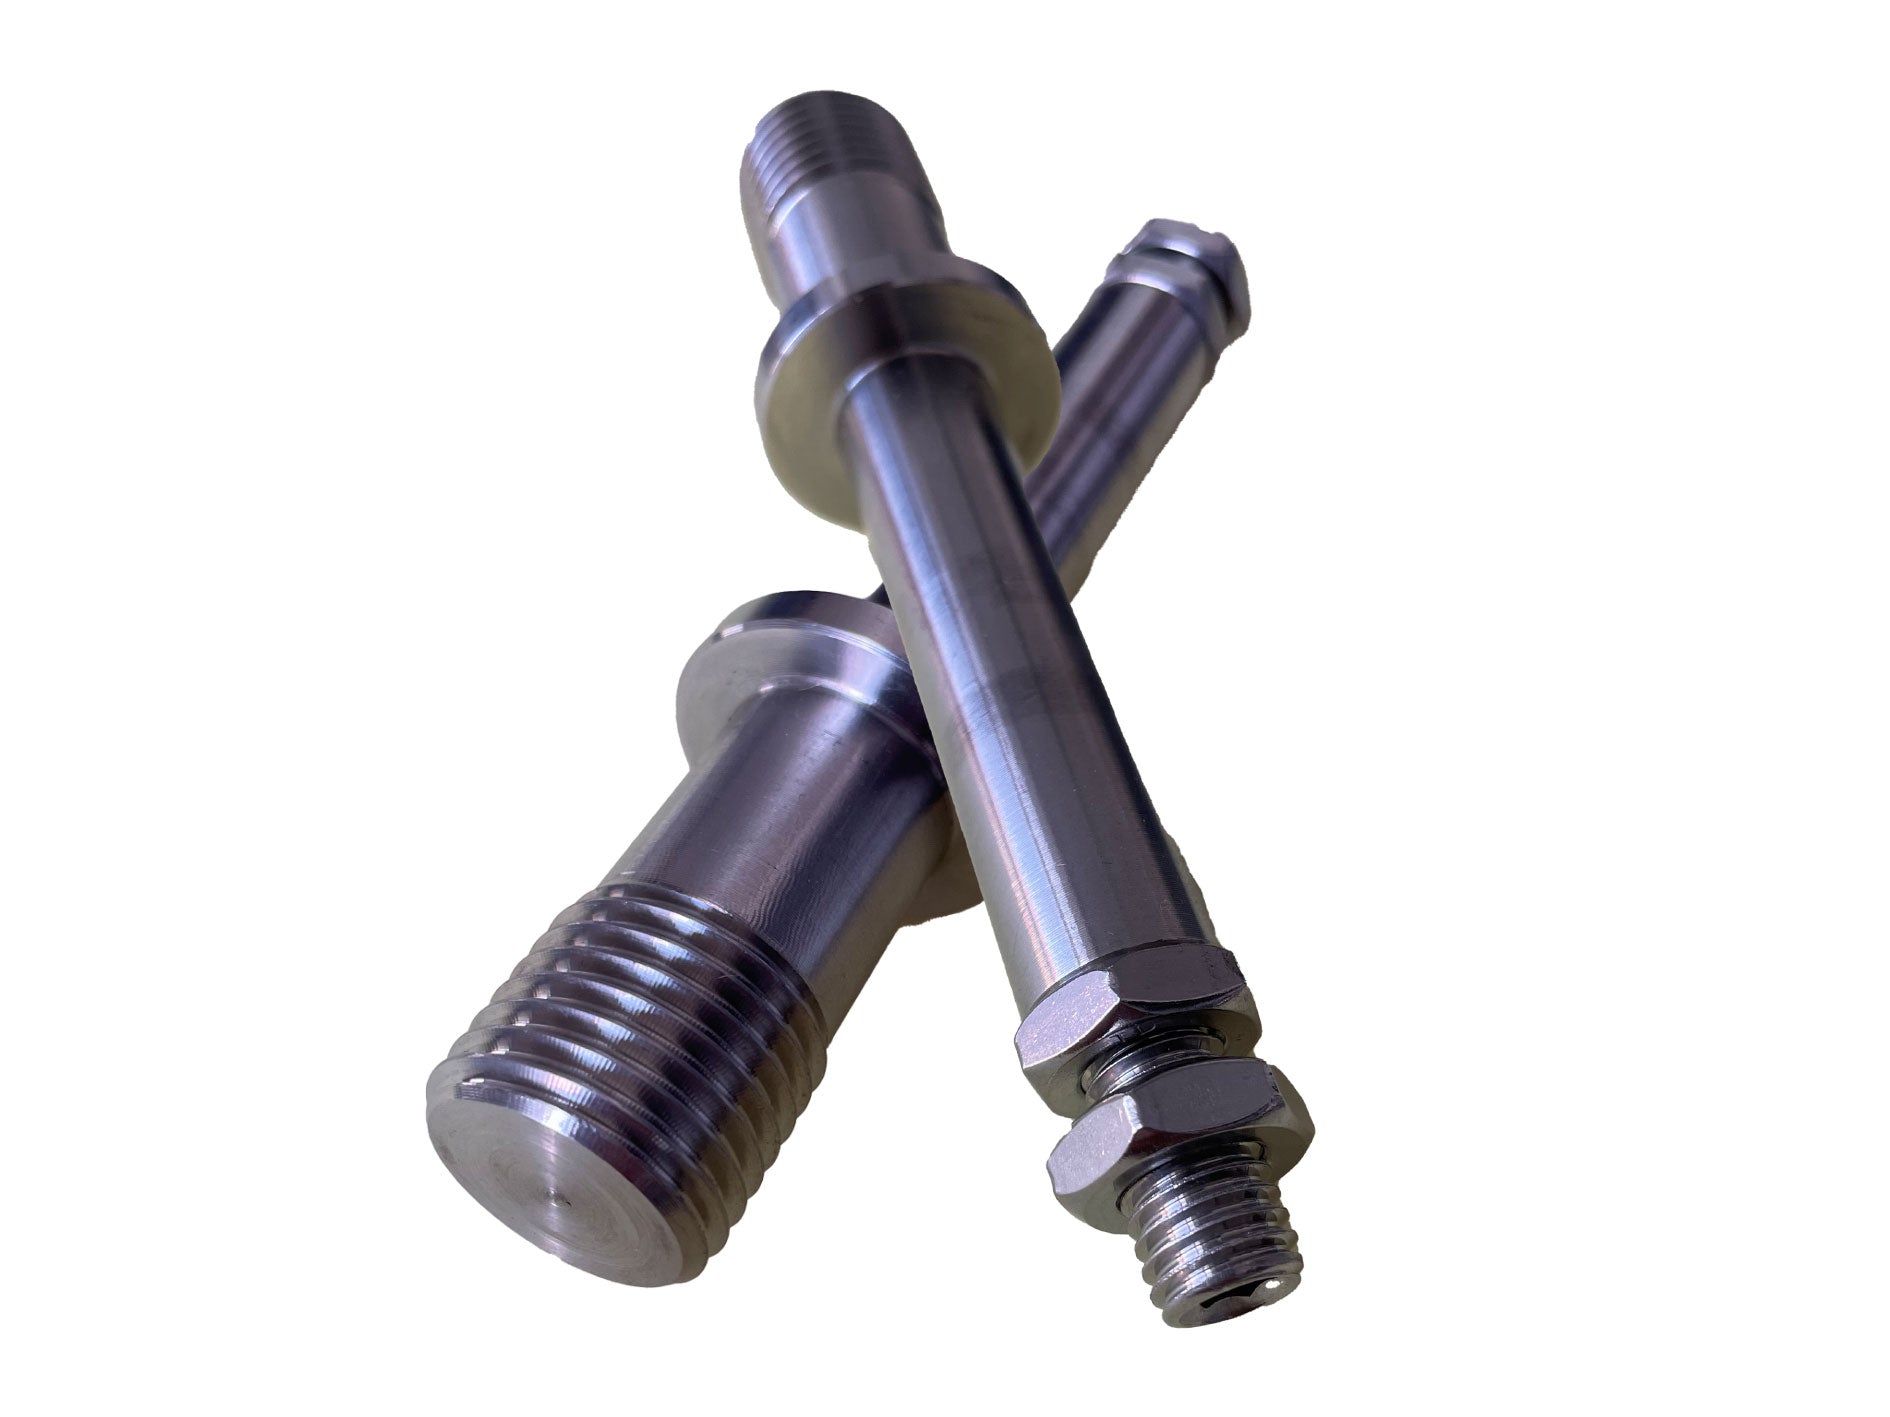 Threaded adapter for tow hook/loop